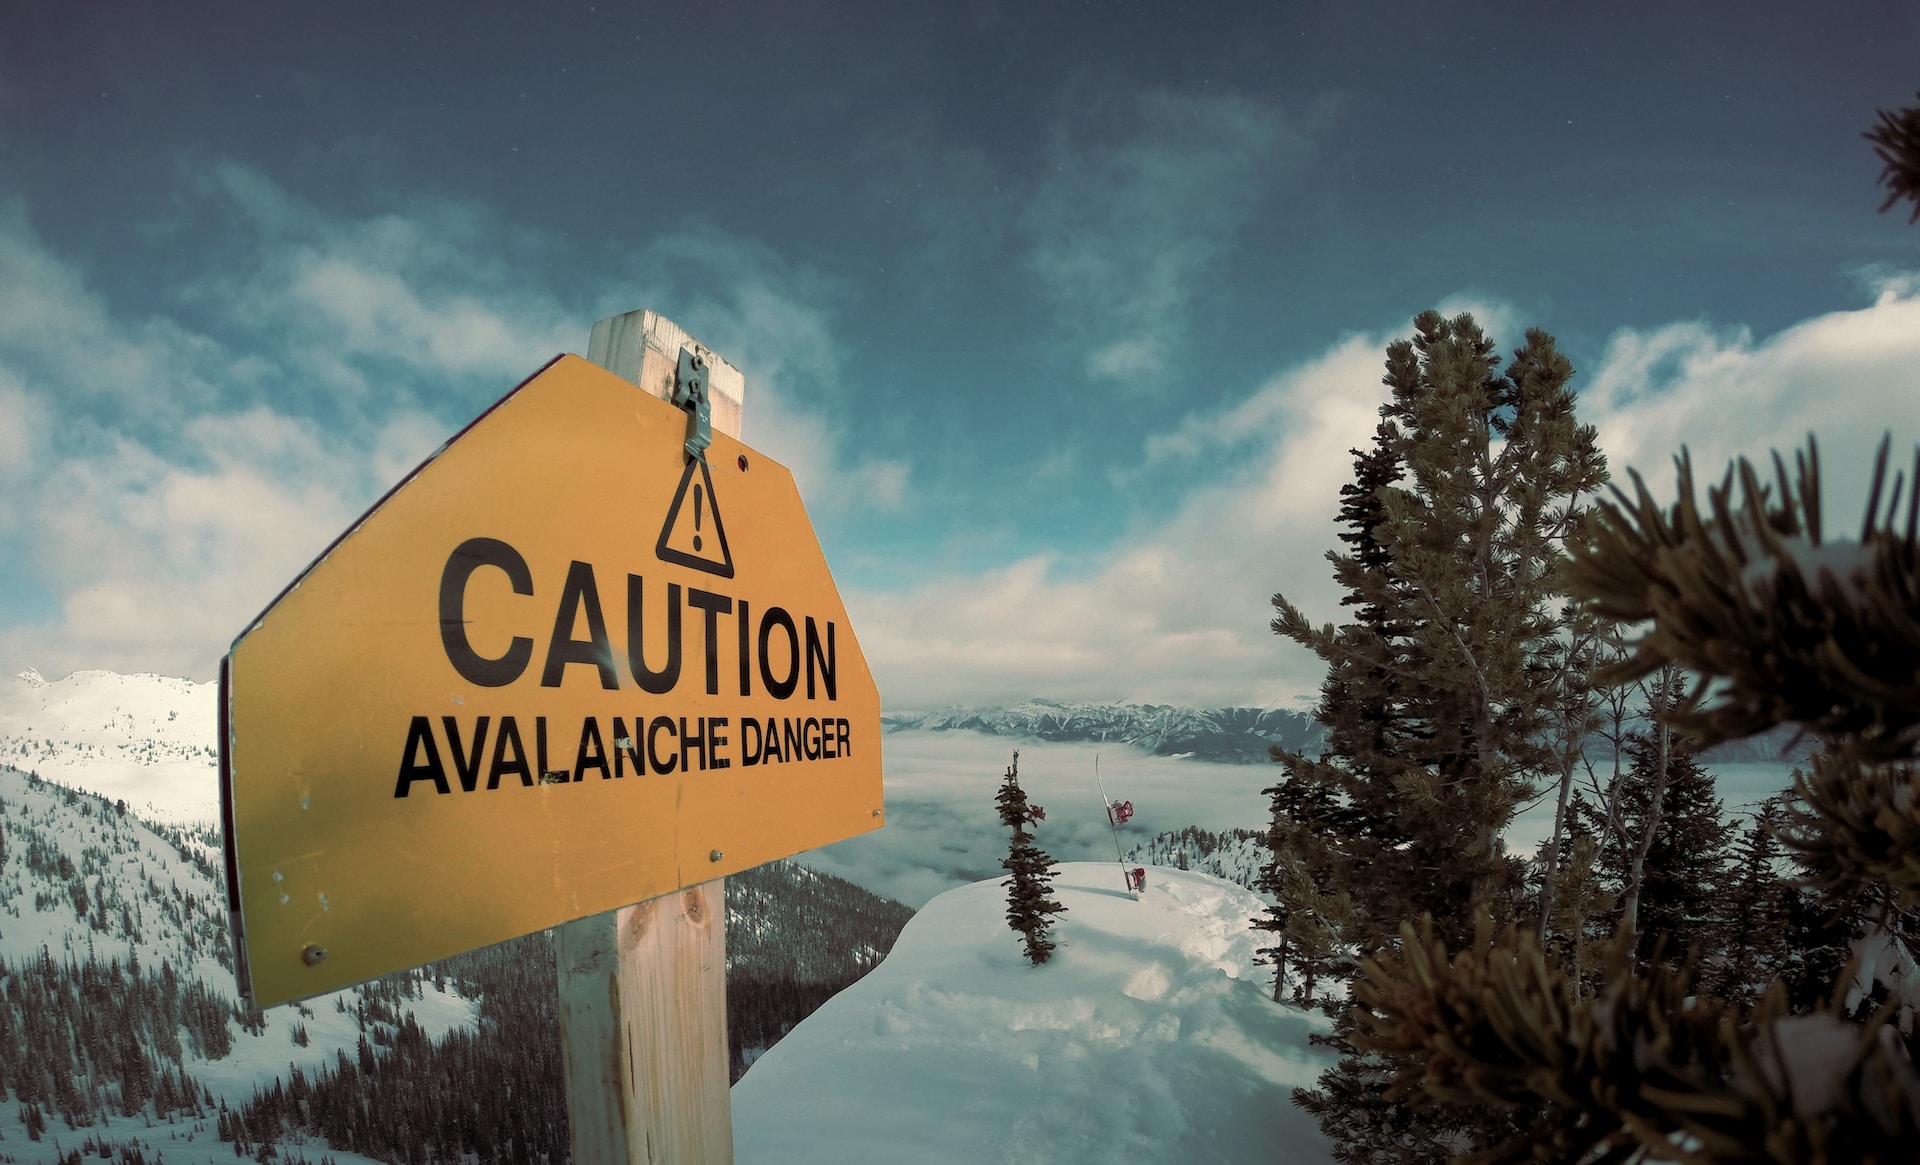 Photo of a snowy mountain landscape. Prominent in the foreground is a yellow warning sign which says "CAUTION, AVALANCHE DANGER"